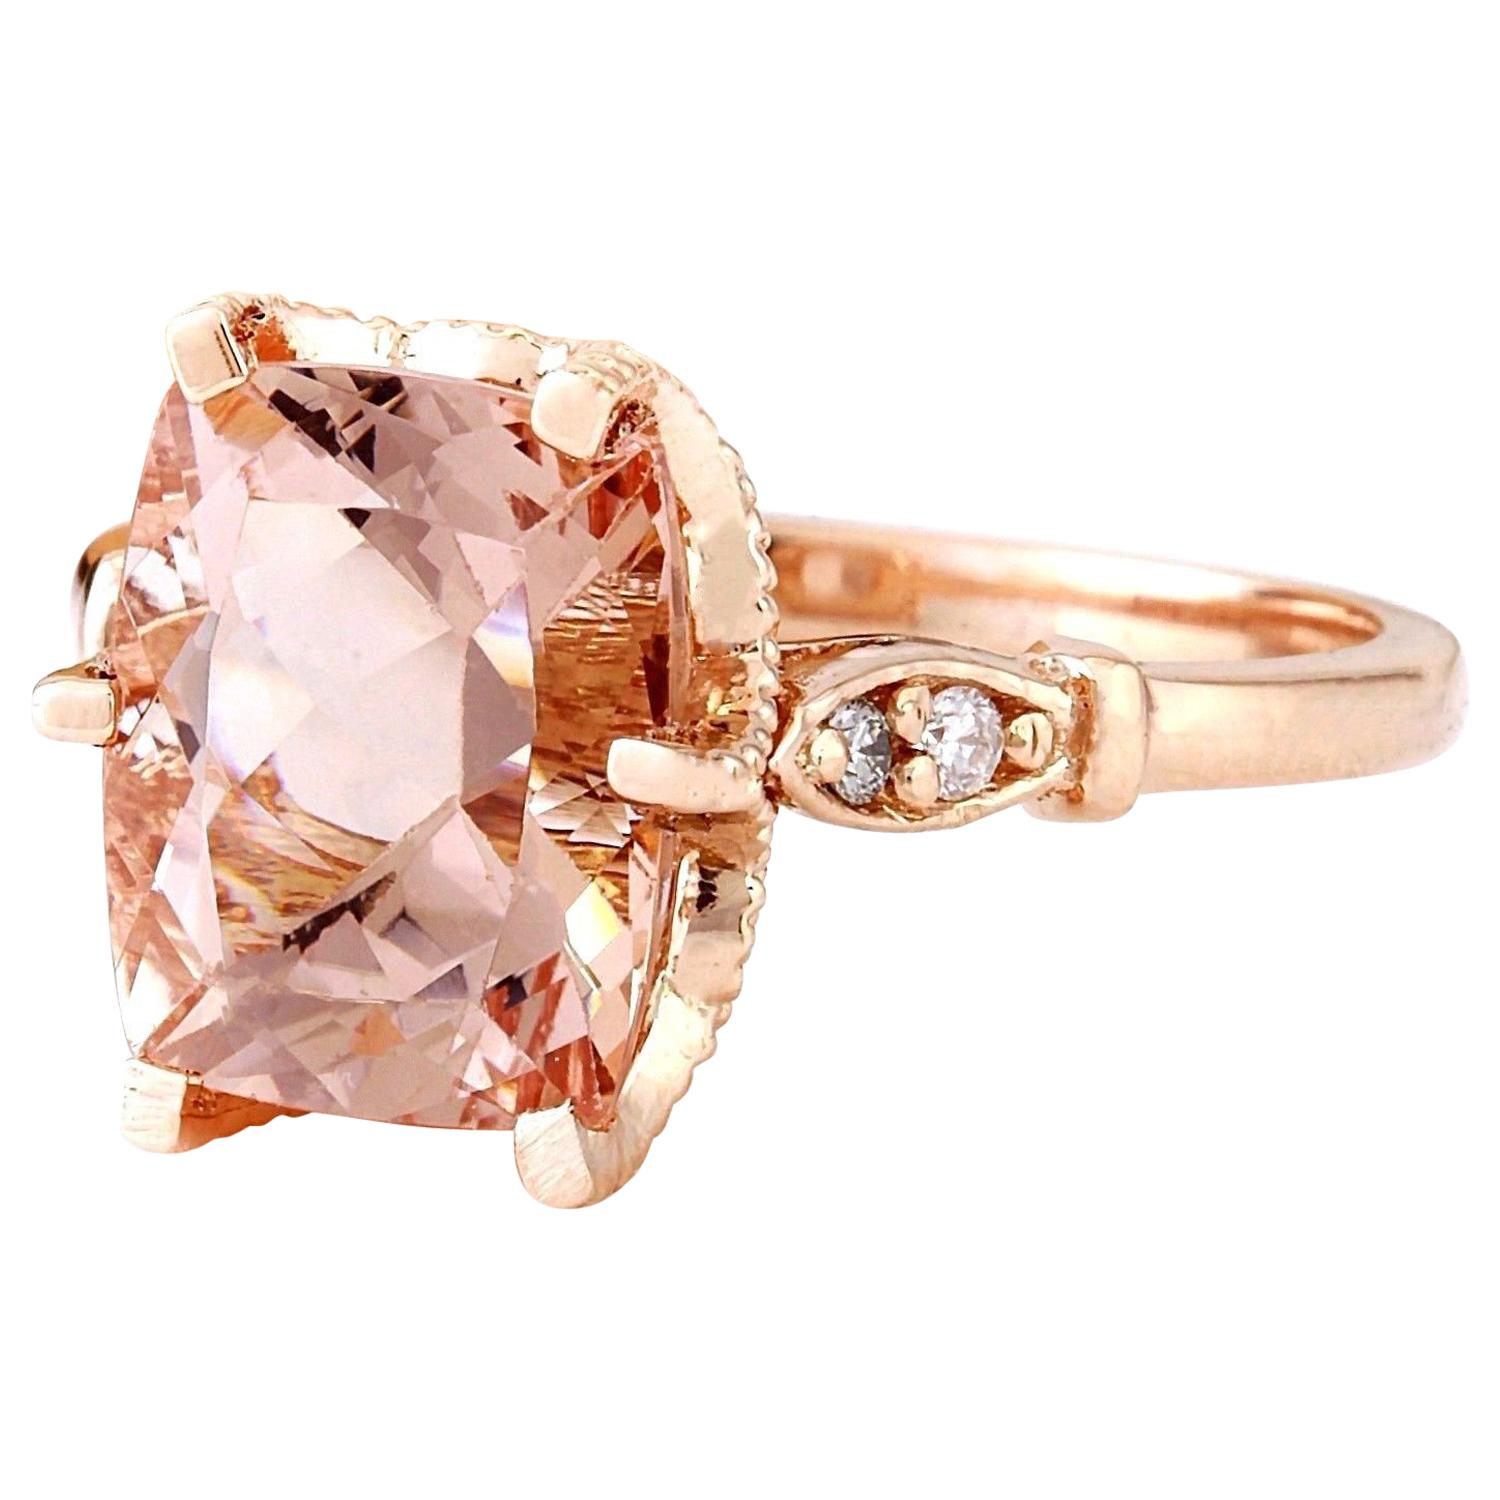 Indulge in the timeless elegance of our 3.4 Carat Natural Morganite Ring, expertly crafted in lustrous 14K Rose Gold. At its heart lies a resplendent cushion-cut morganite gemstone weighing 3.35 carats, boasting dimensions of 10.00x8.00 mm, exuding